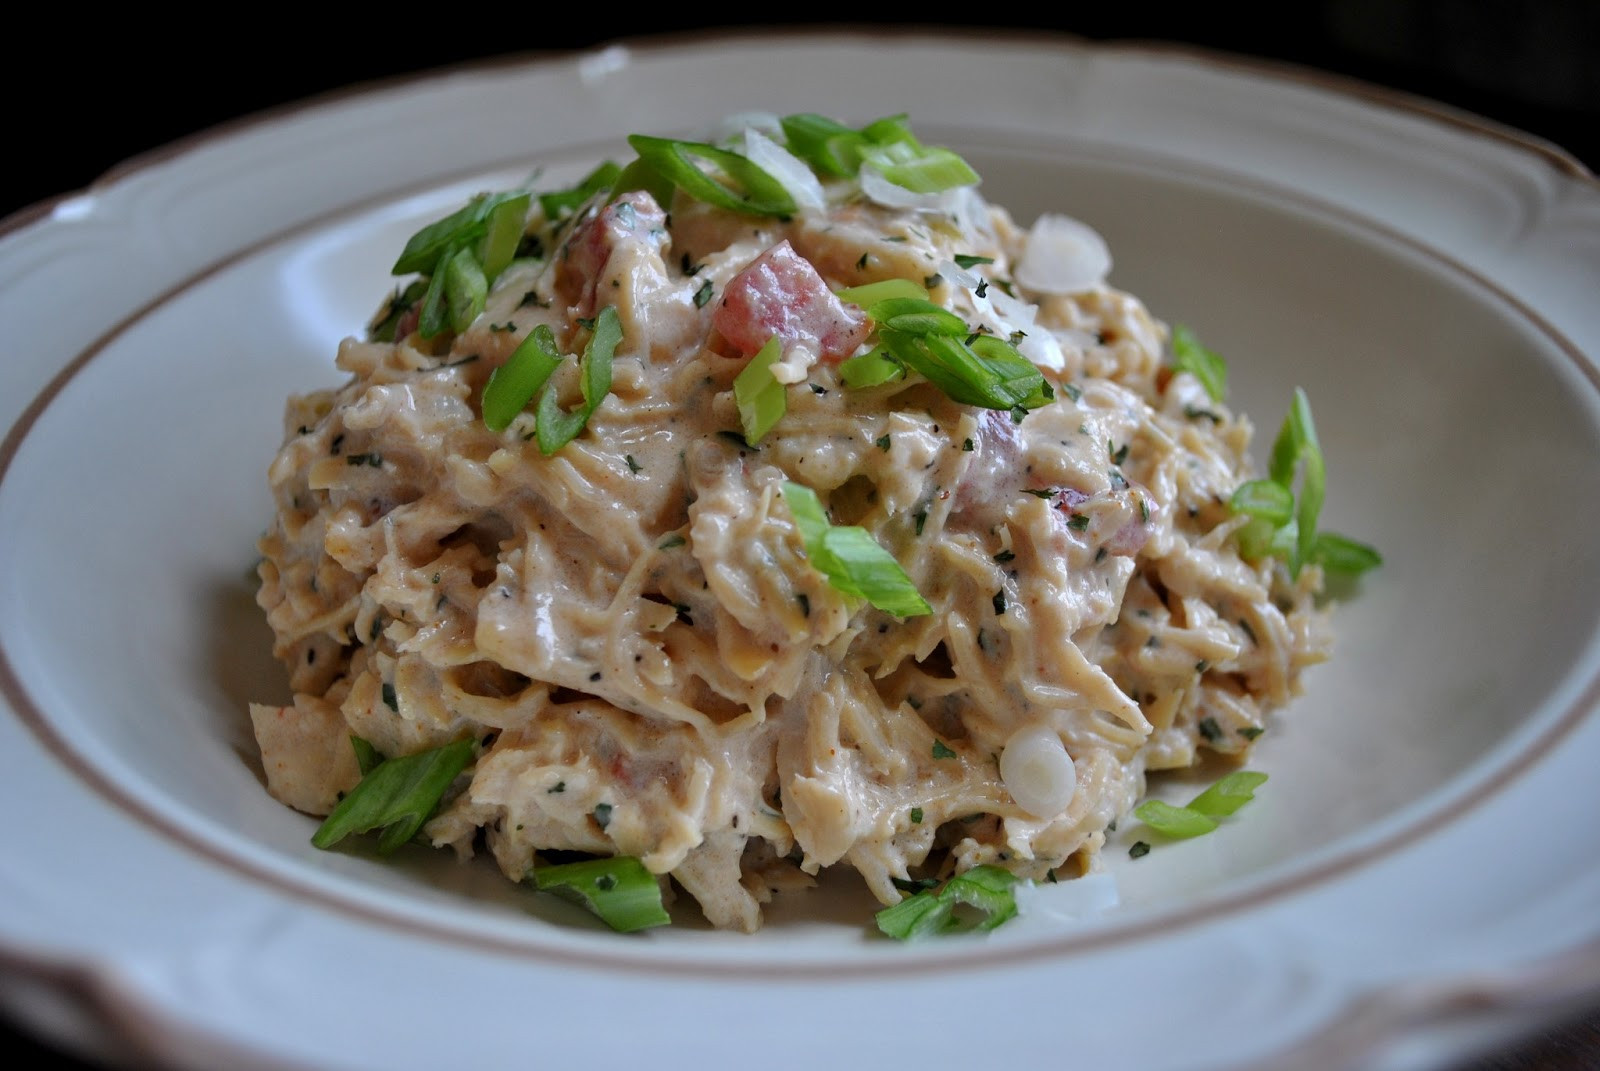 How To Make Chicken Salad With Canned Chicken
 The Low Carb Review Southwest Chicken Salad